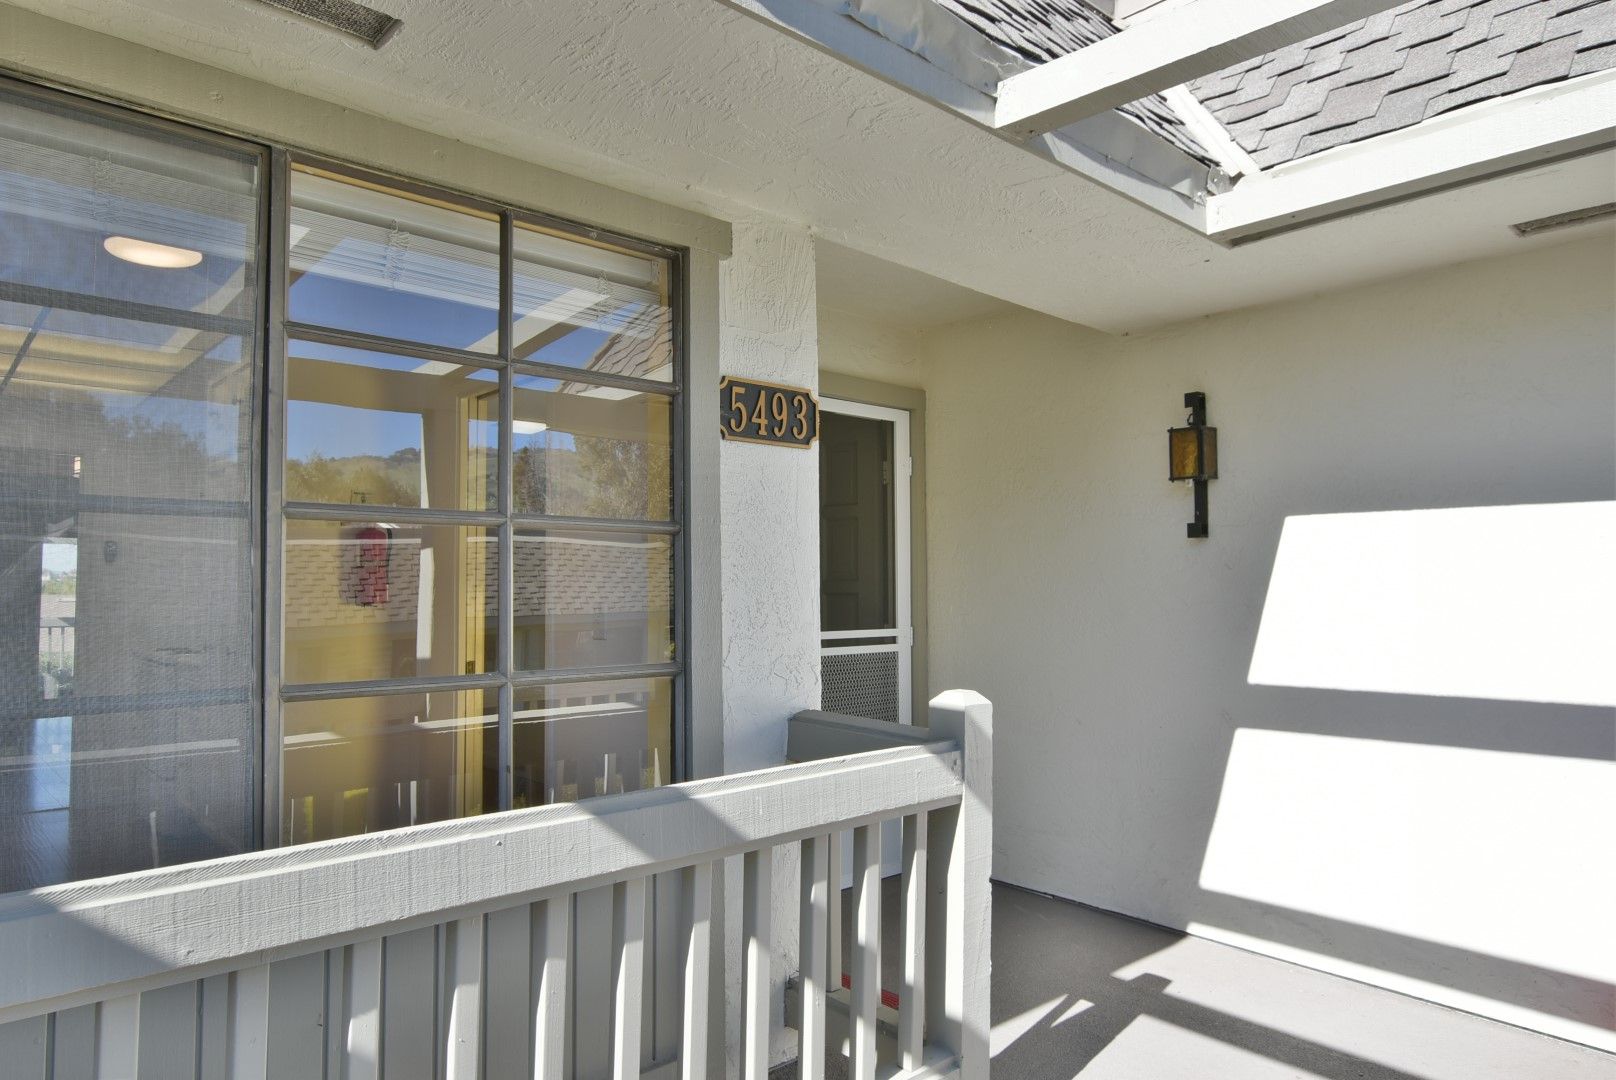 Sharp, Bright and Tranquil 2 Bedroom 2 Bath Condo in the Villages Community!